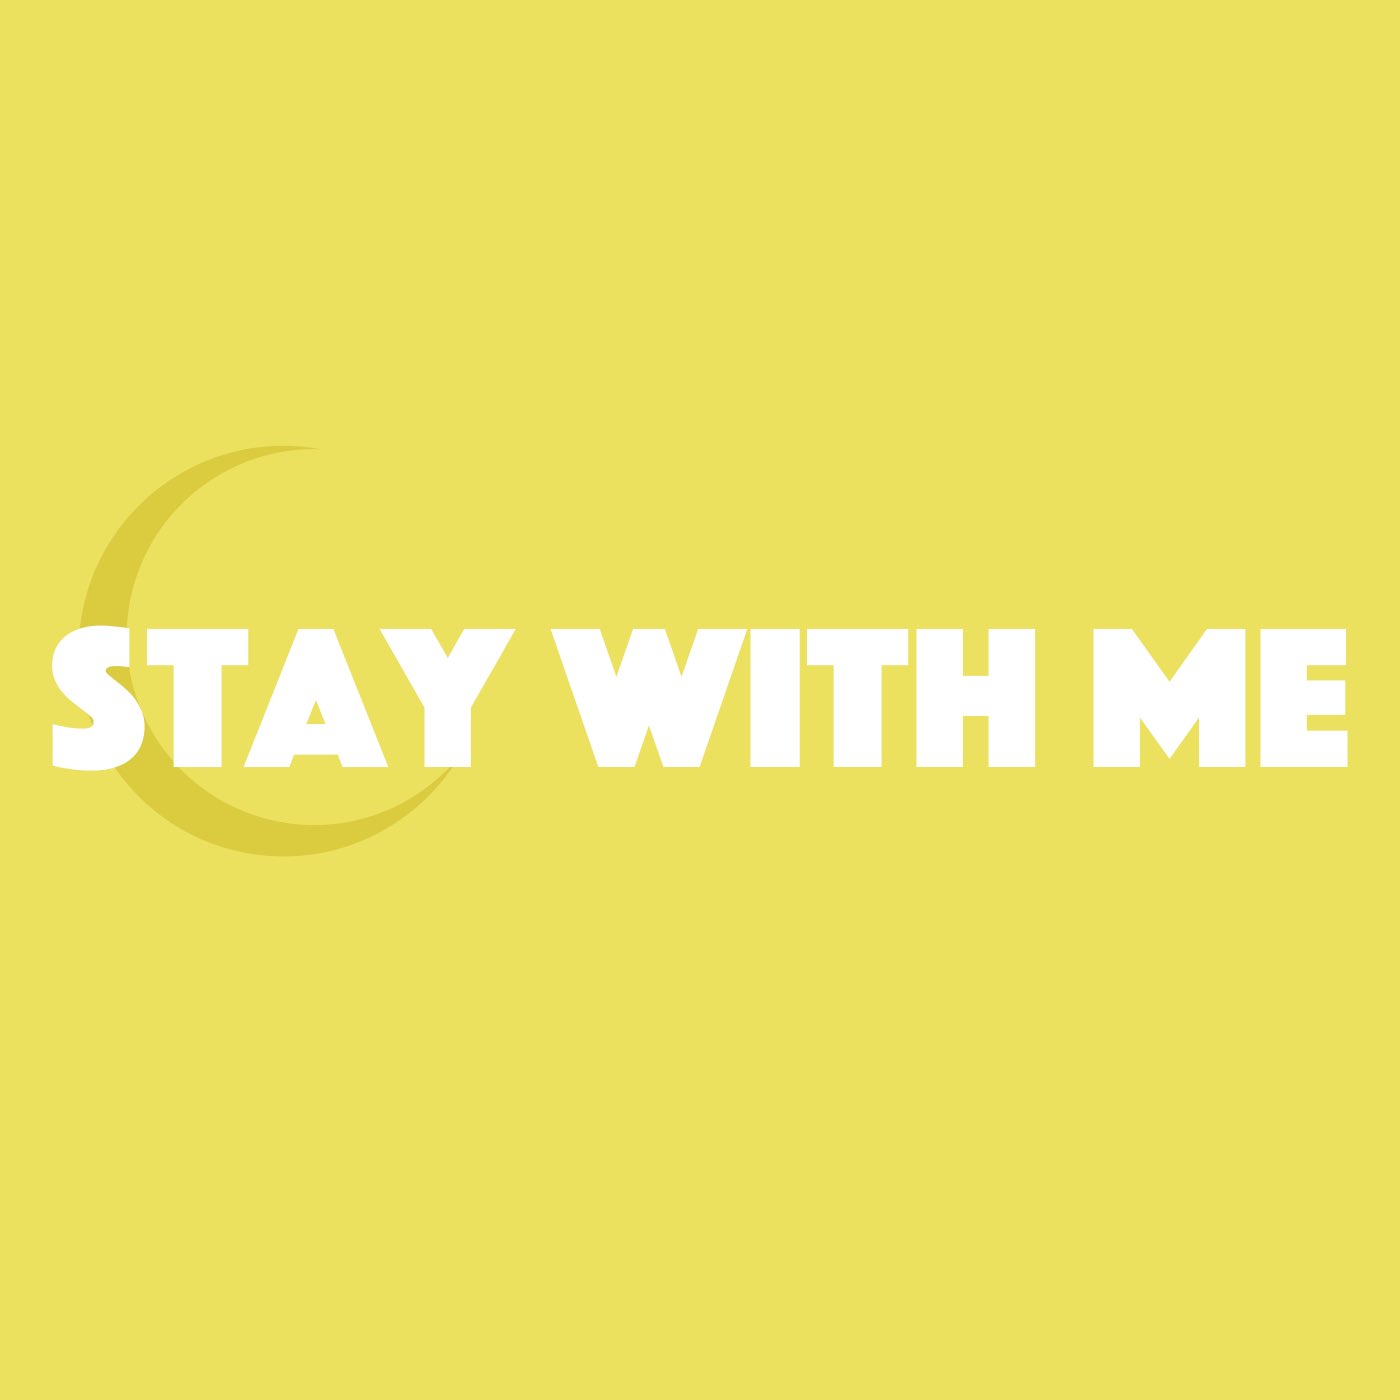 staywithme